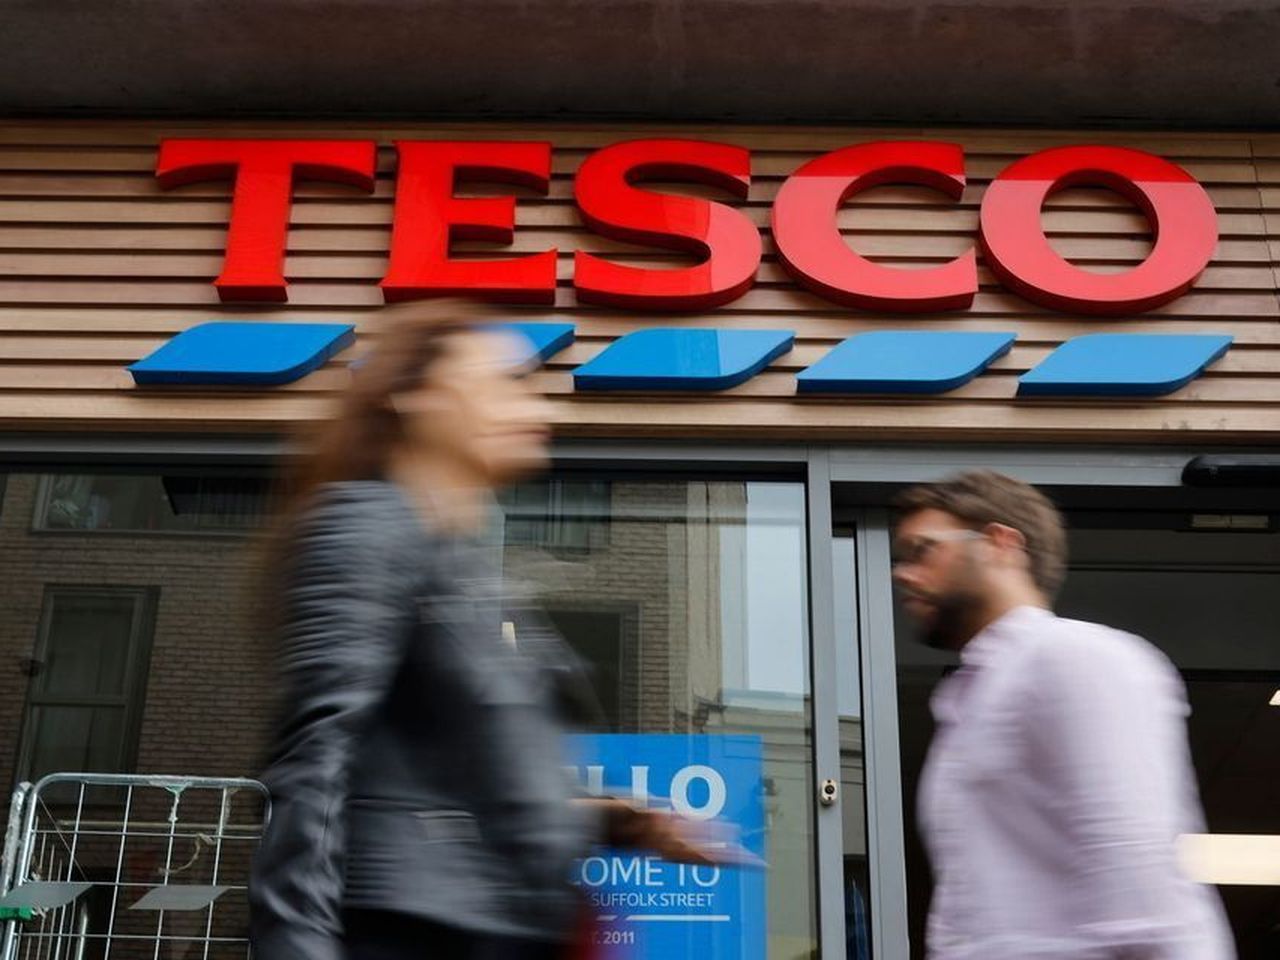 Tesco must pay €23,363 to manager over dismissal